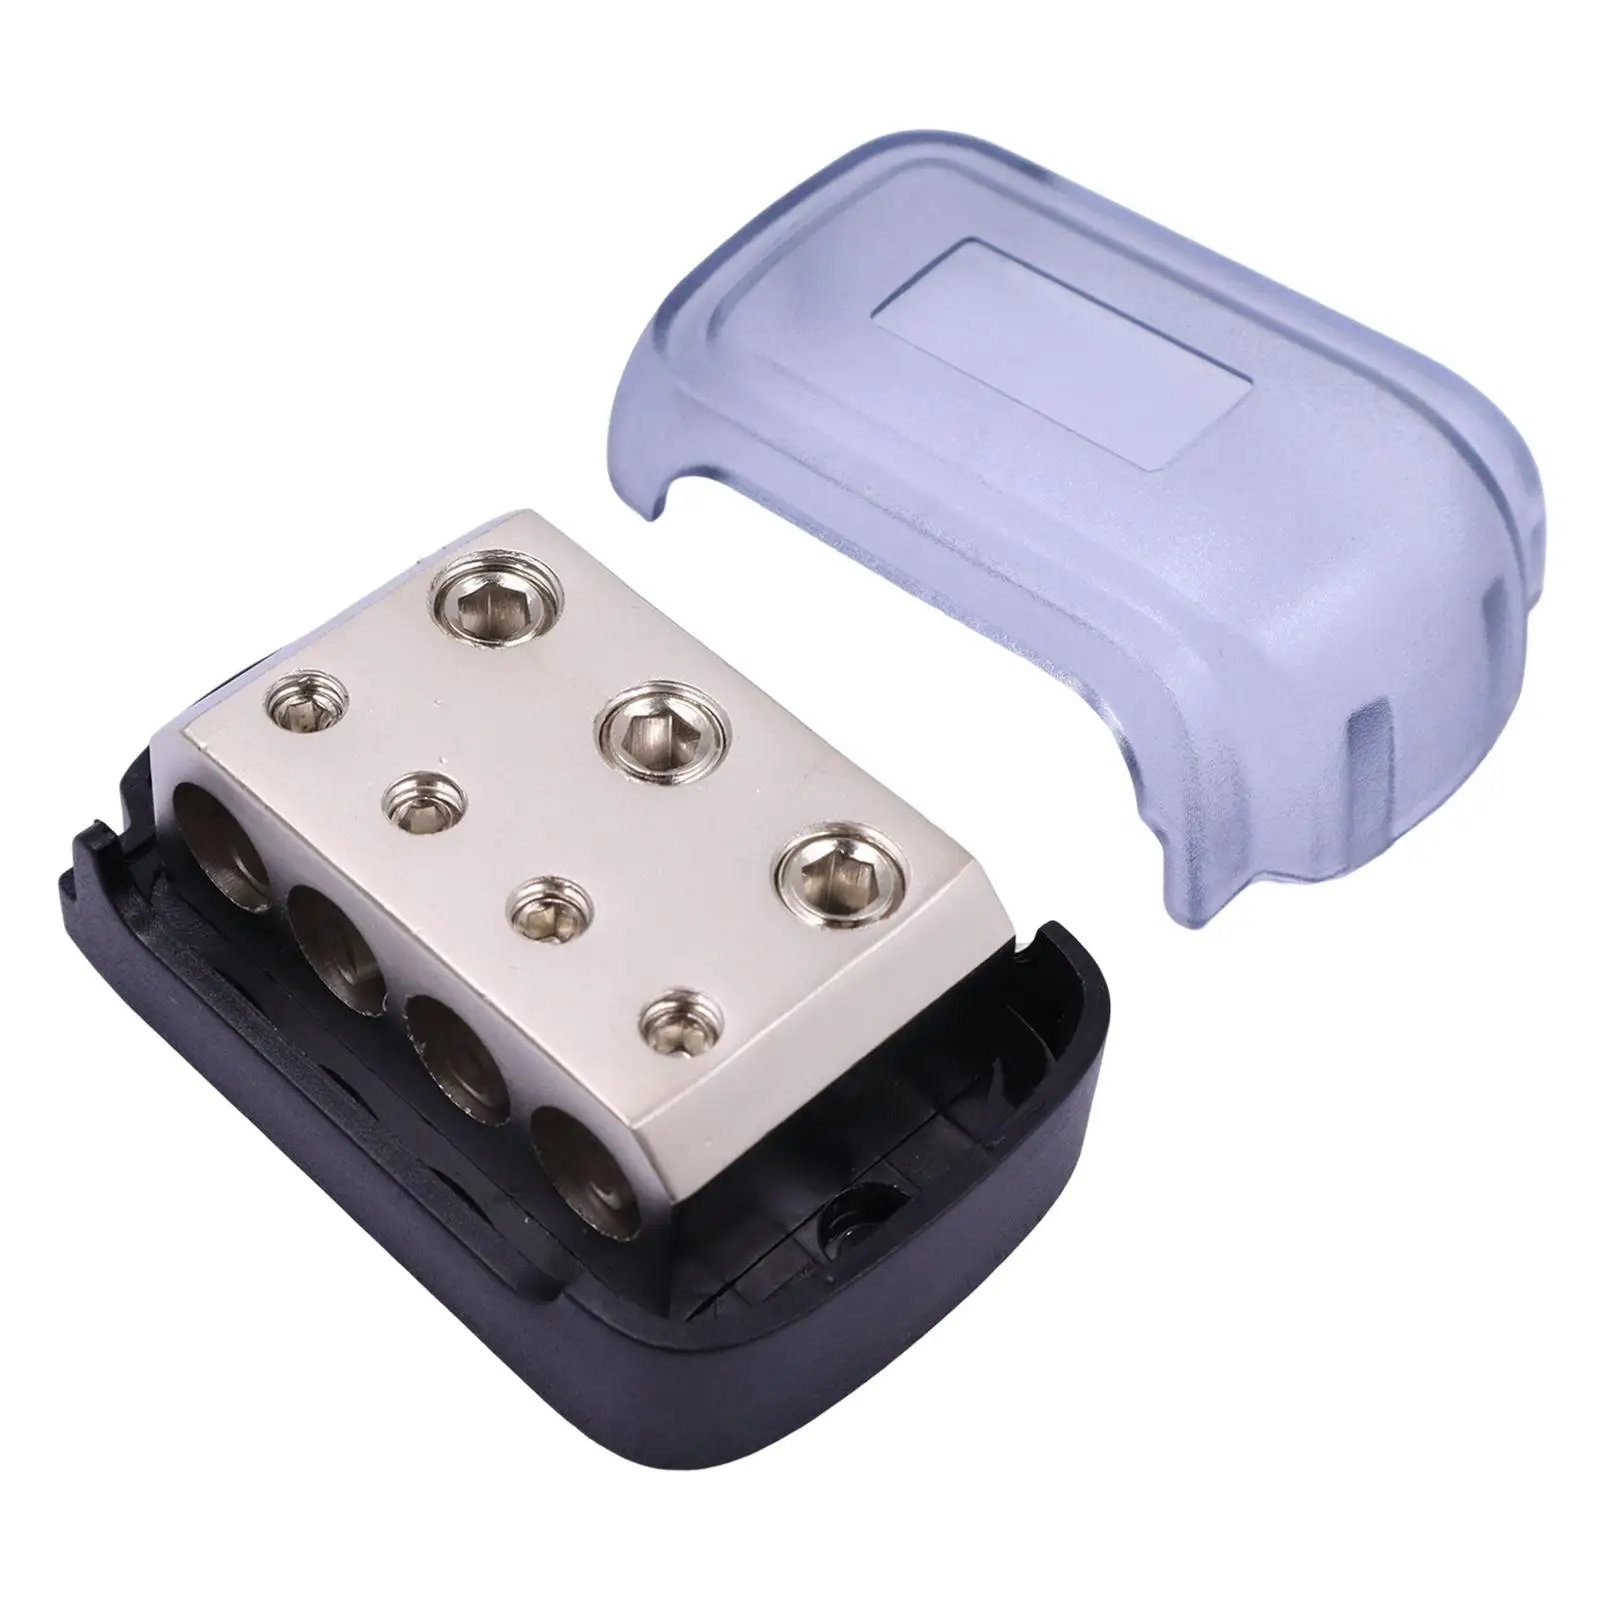 Car Stereo Holder Power Distribution audio Splitter Block Replace Parts